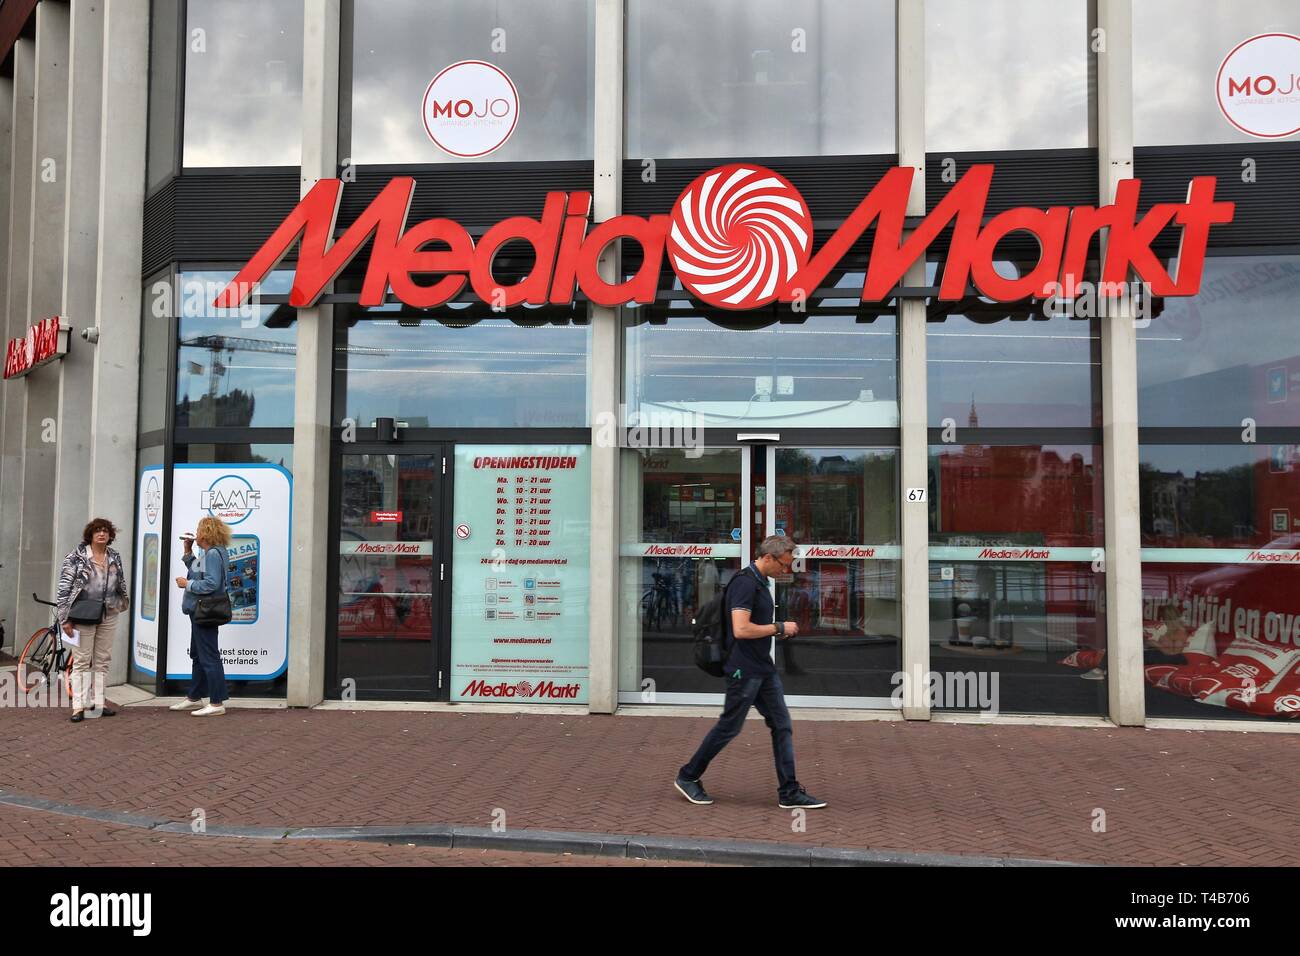 elegant Symptomen Nauwkeurig AMSTERDAM, NETHERLANDS - JULY 8, 2017: People walk by Media Markt store in  Amsterdam. Media Markt is the largest consumer electronics store chain in E  Stock Photo - Alamy